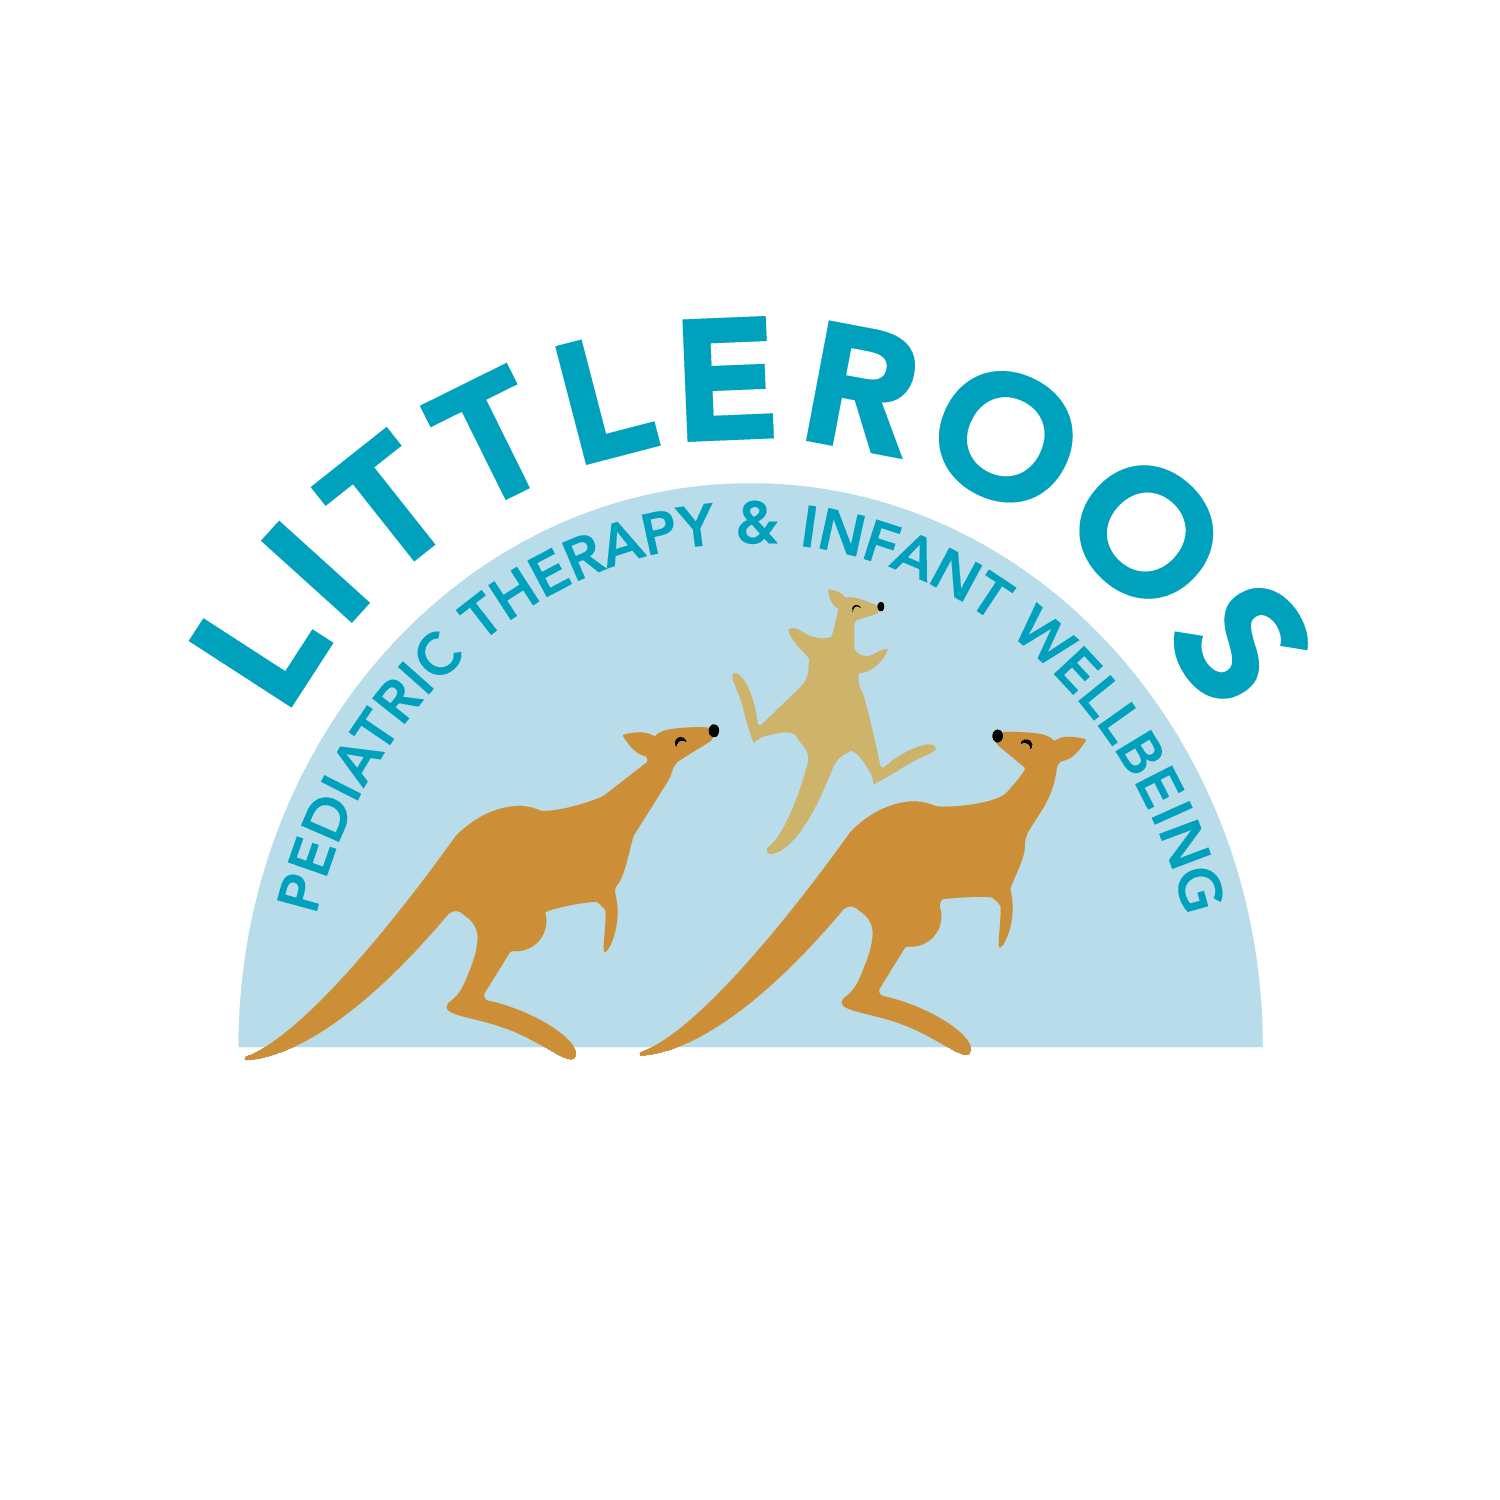 Little Roos Pediatric Therapy & Infant Wellbeing